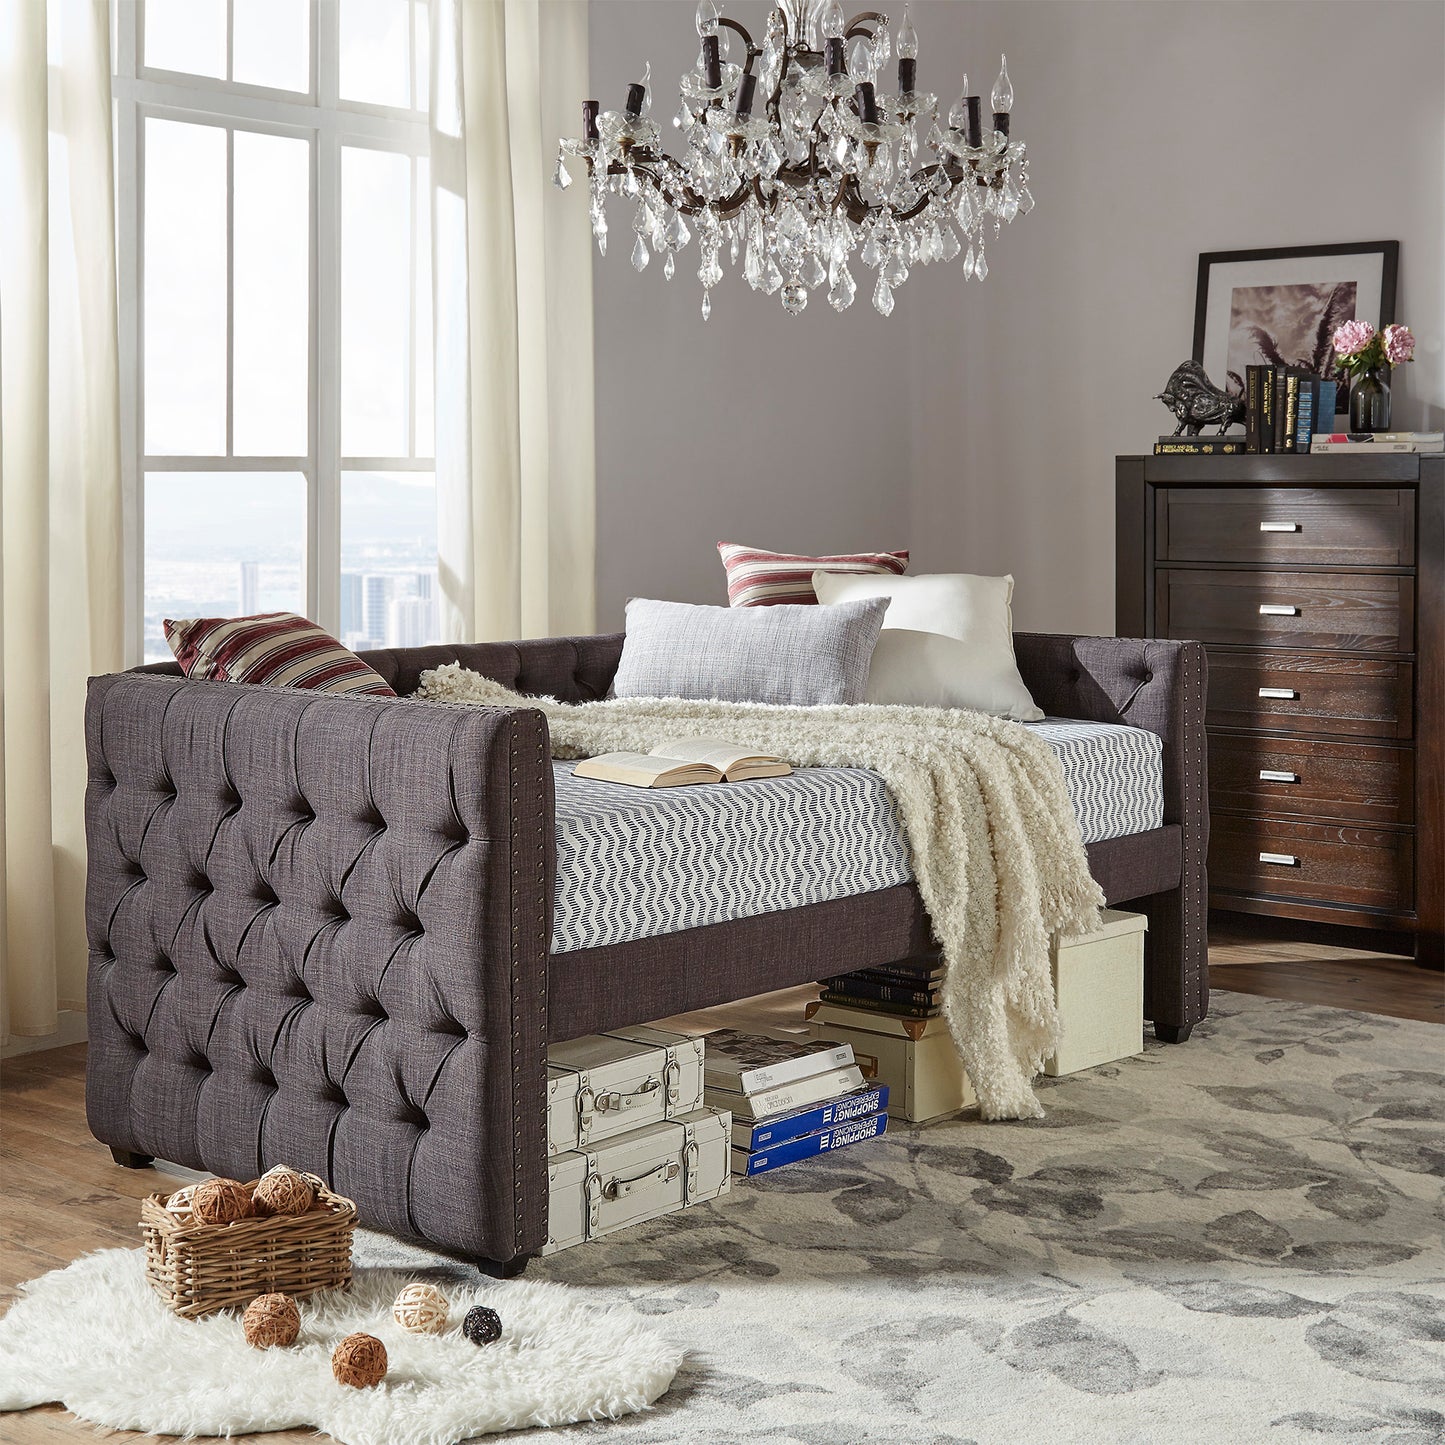 Tufted Nailhead Daybed - Dark Grey Linen, No Trundle